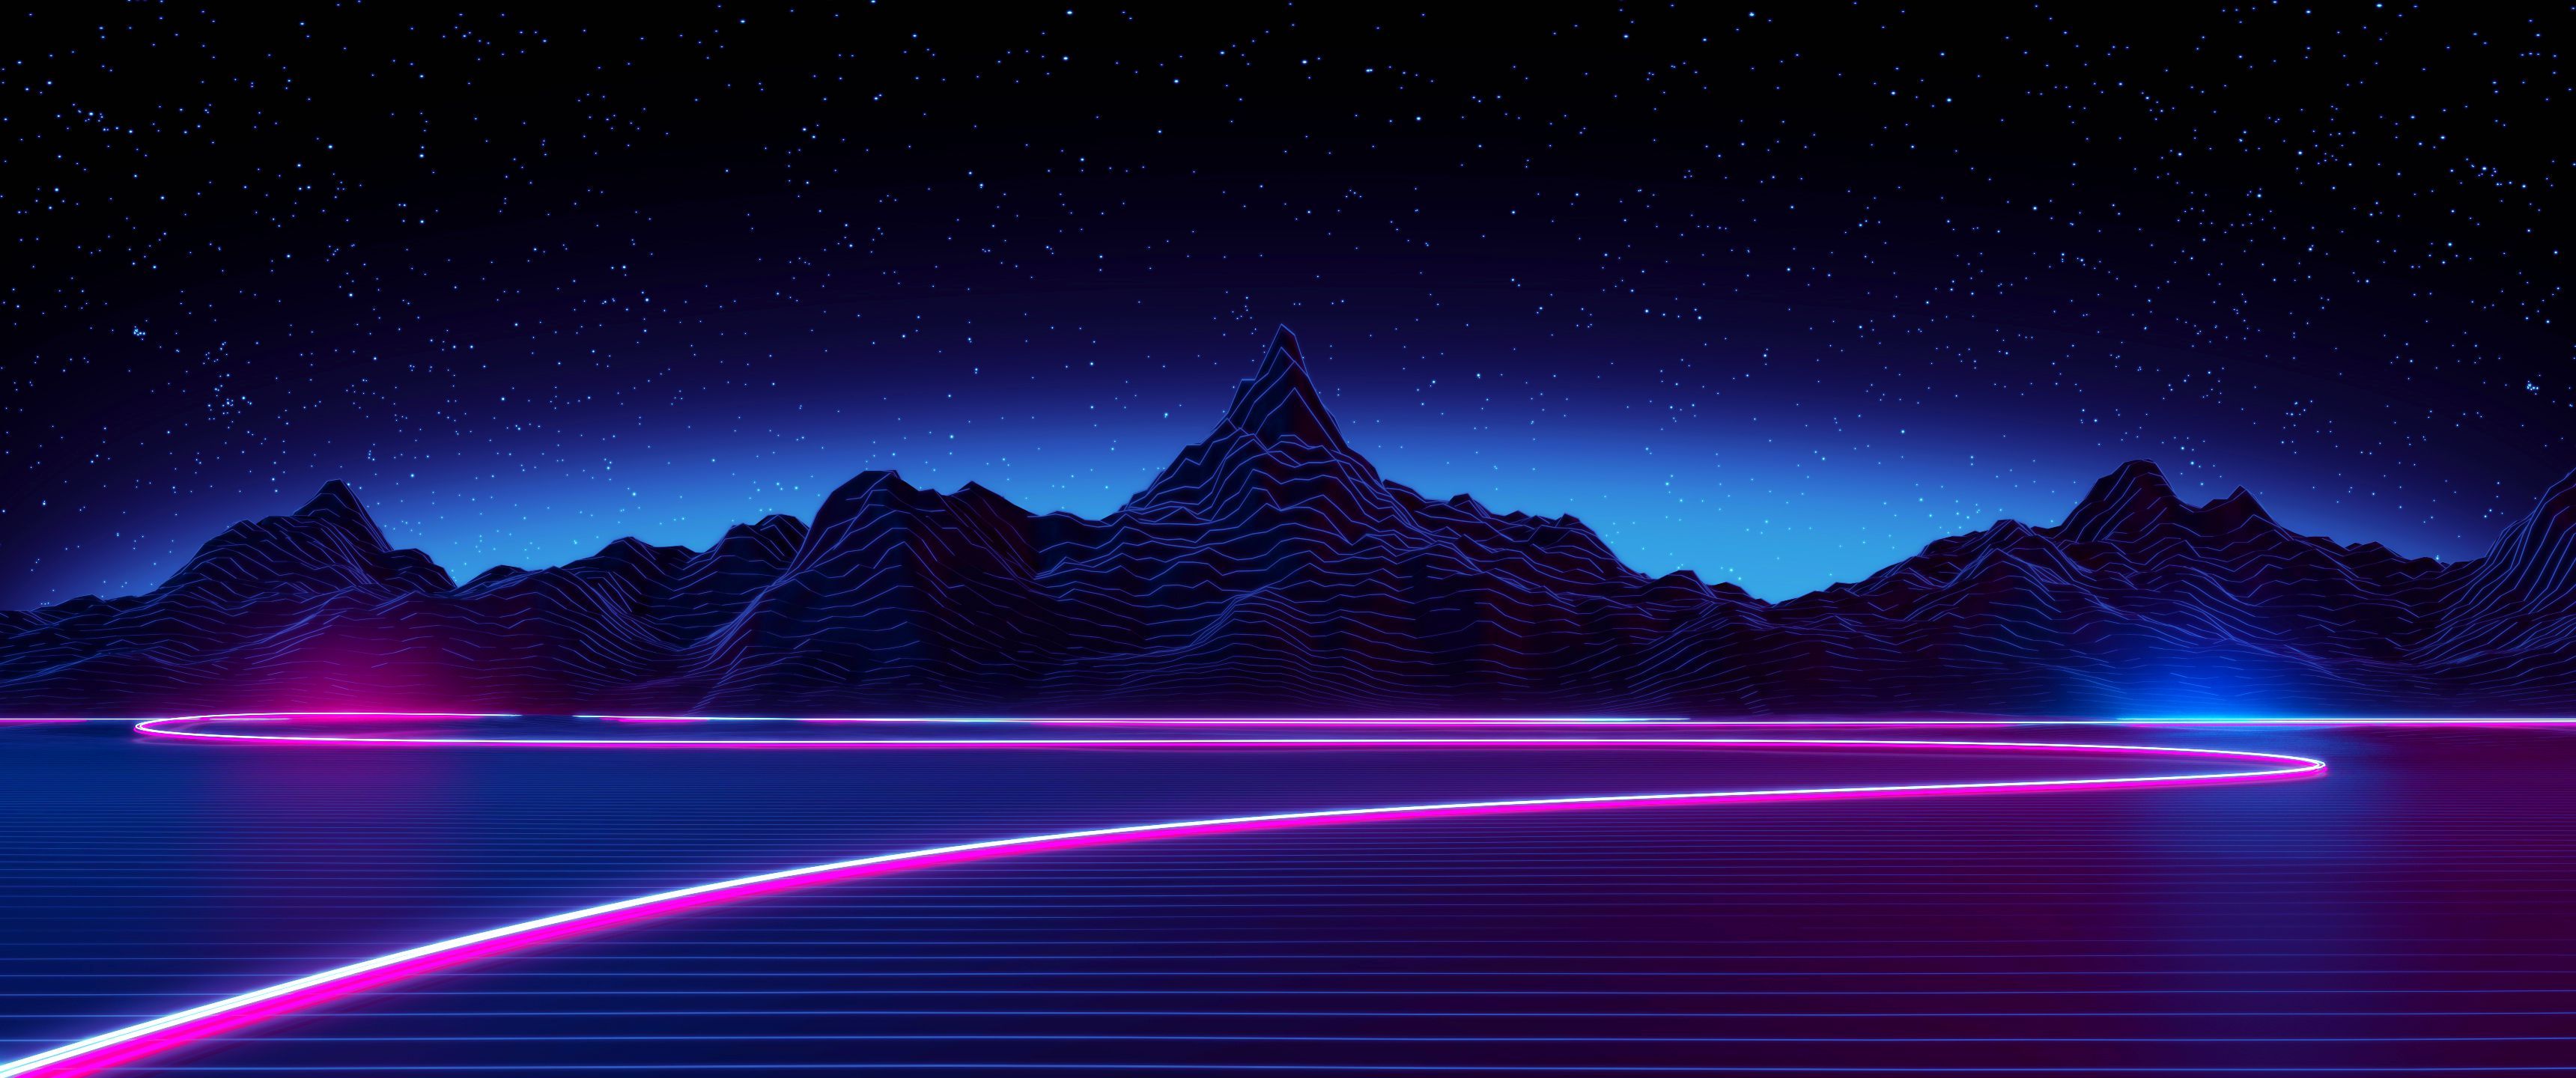 Pls can anyone make a chroma profile for this wallpaper retro 80s